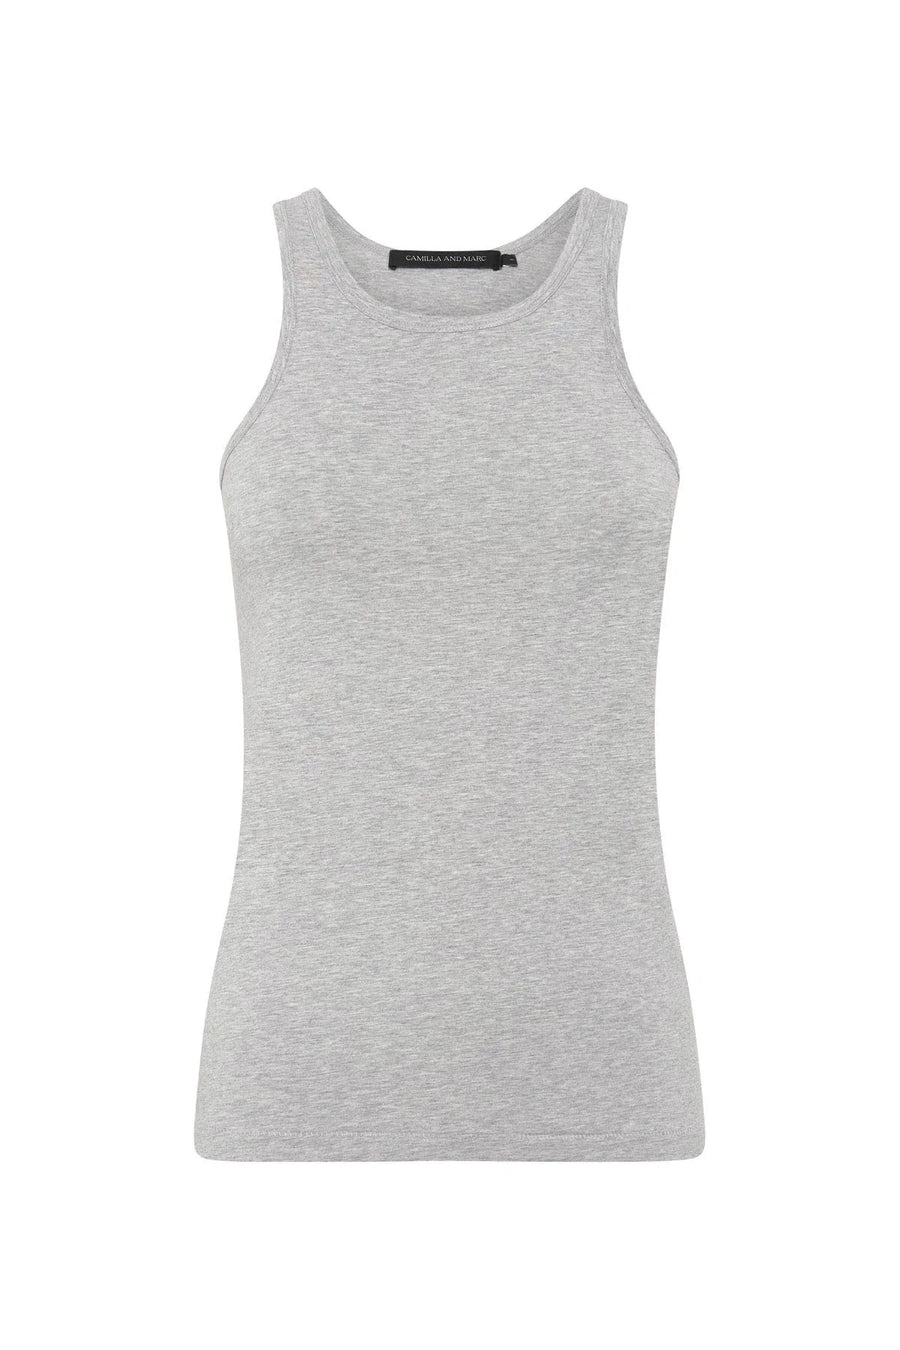 Camilla And Marc Miles Tank in Grey Marle